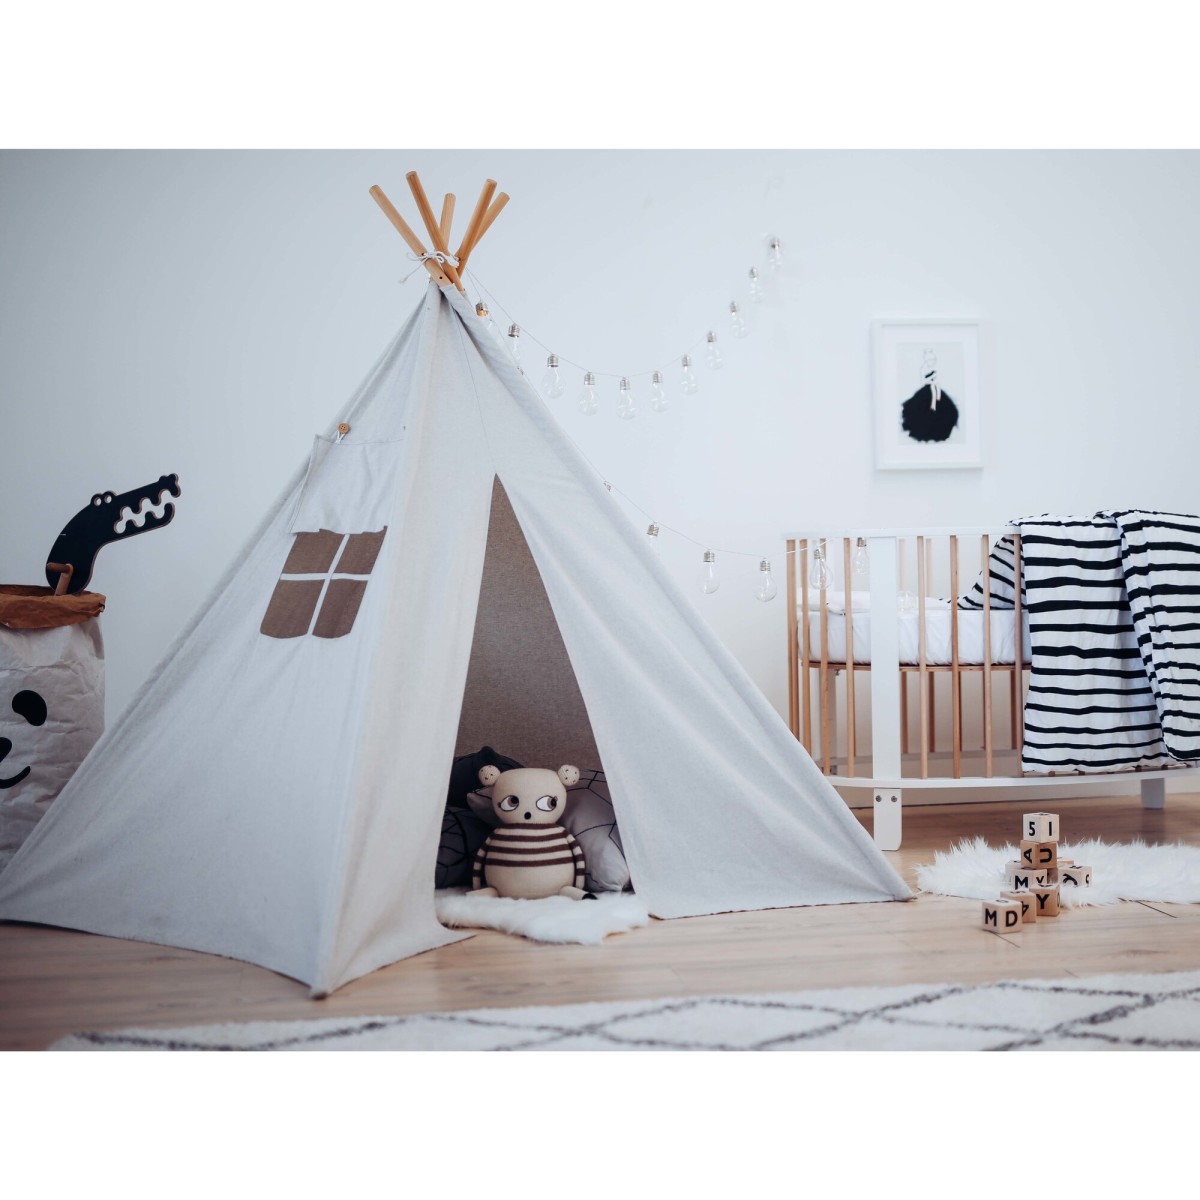 Cool play tents